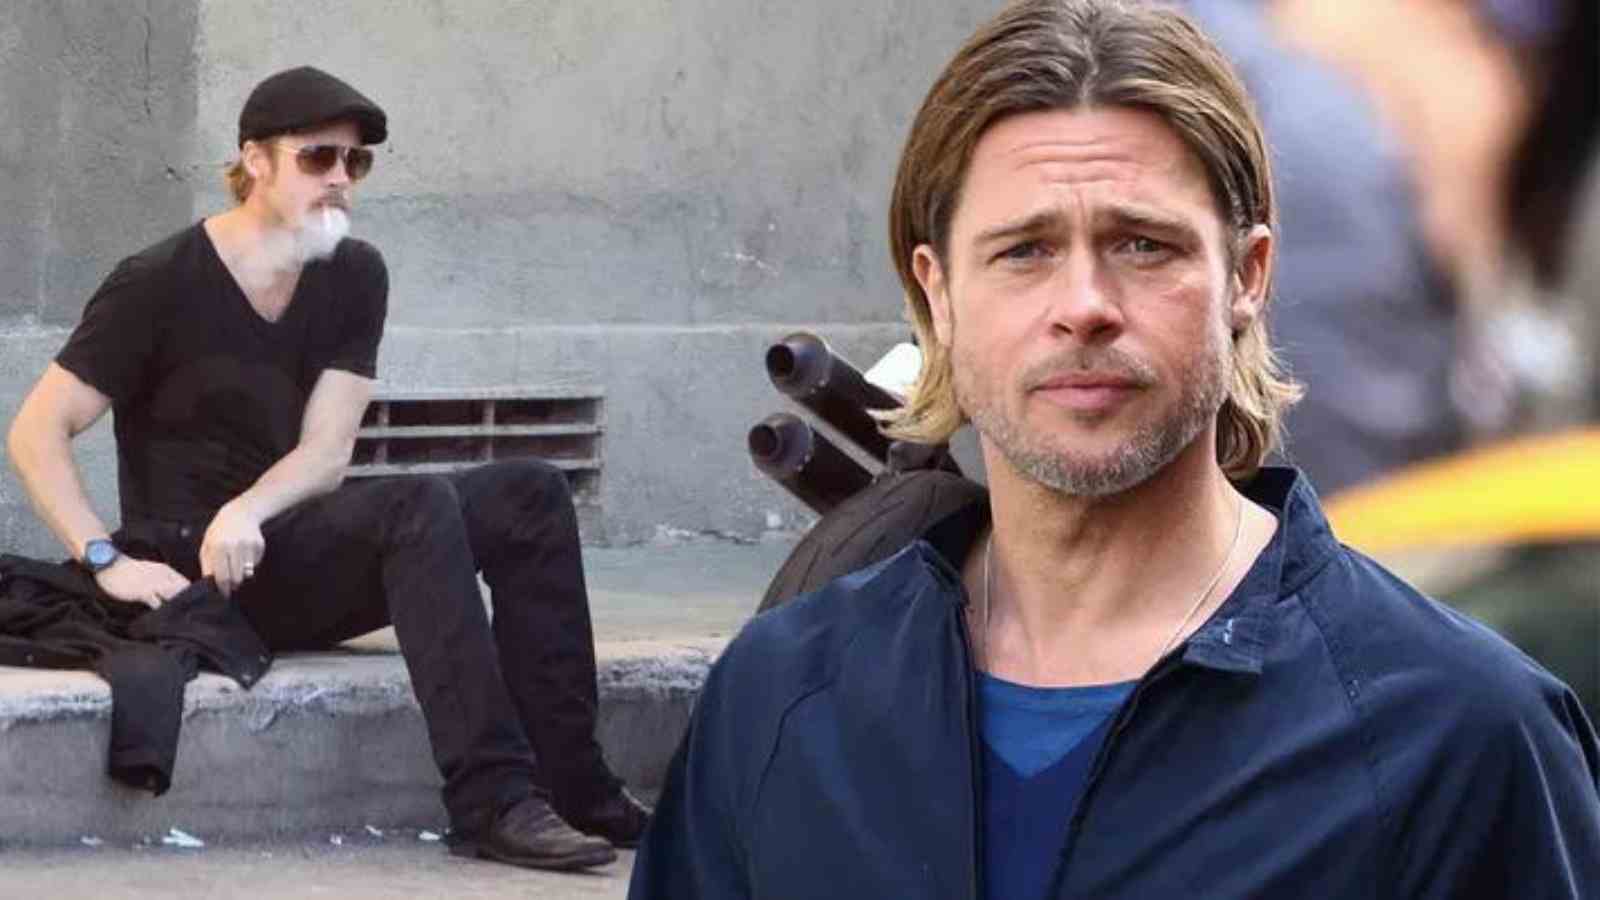 Brad Pitt has given up some of his nasty self destructive habits